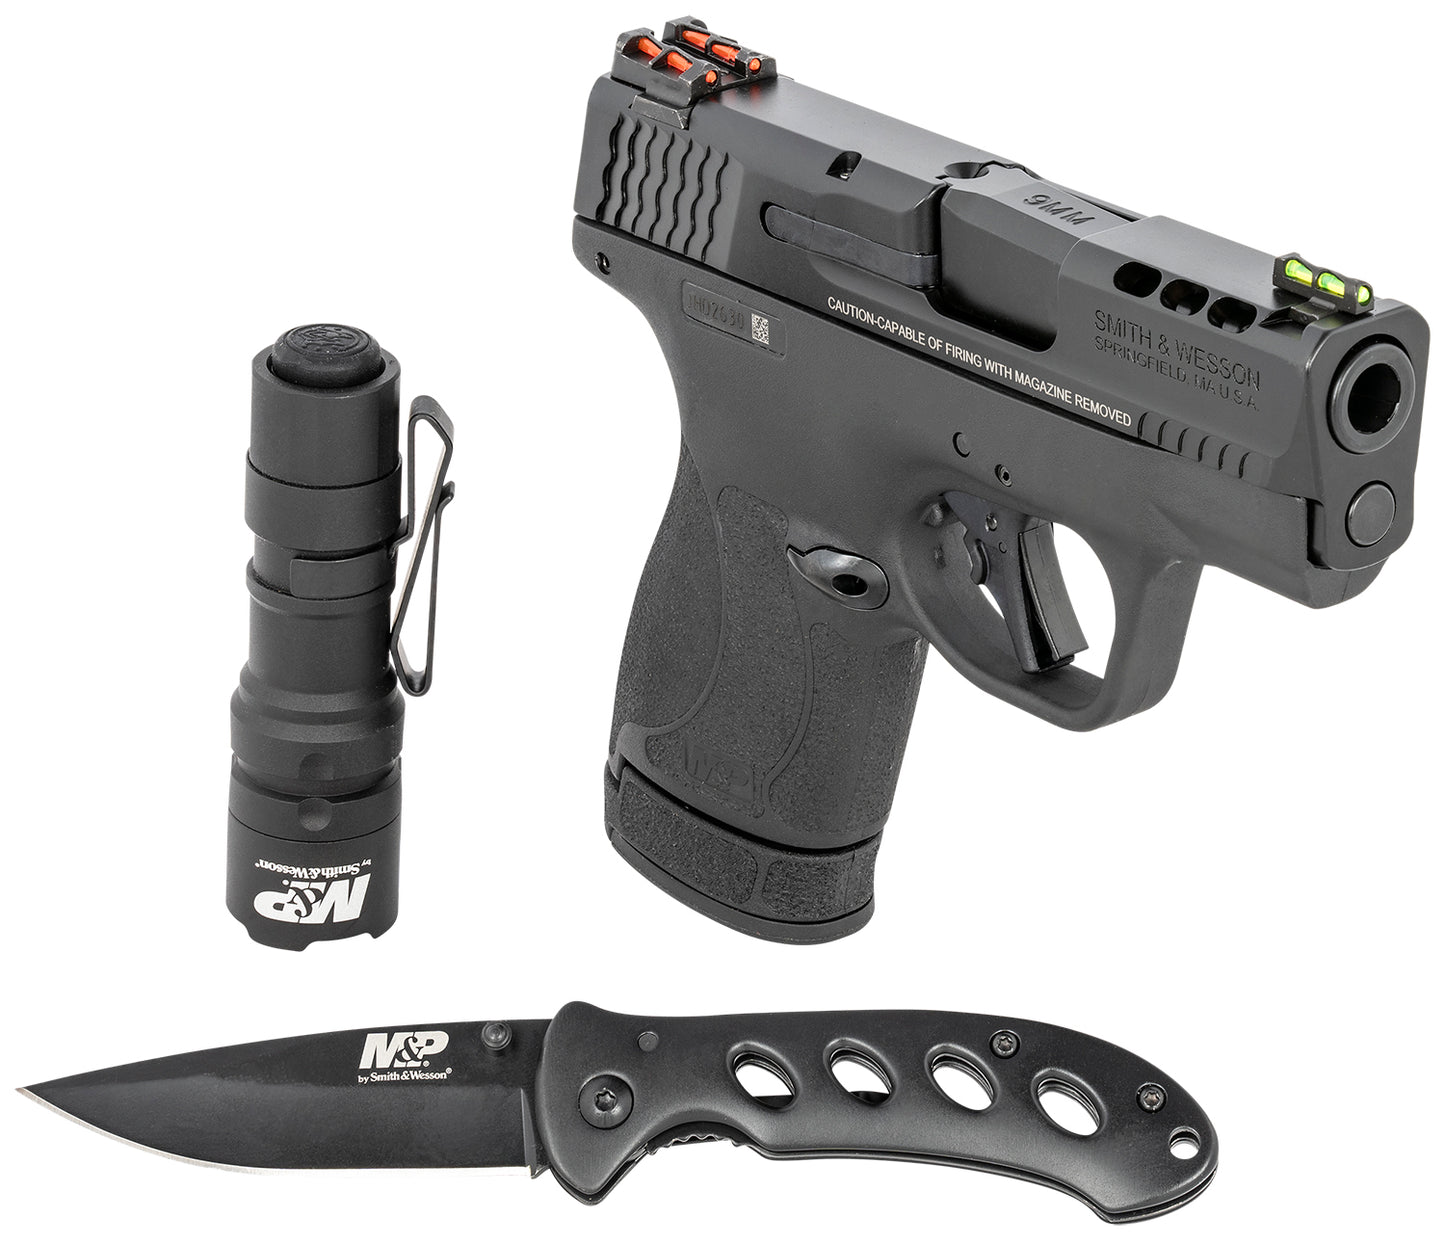 Smith and Wesson PC M&P9 Shield Plus Ported TS 9mm EDC Kit New